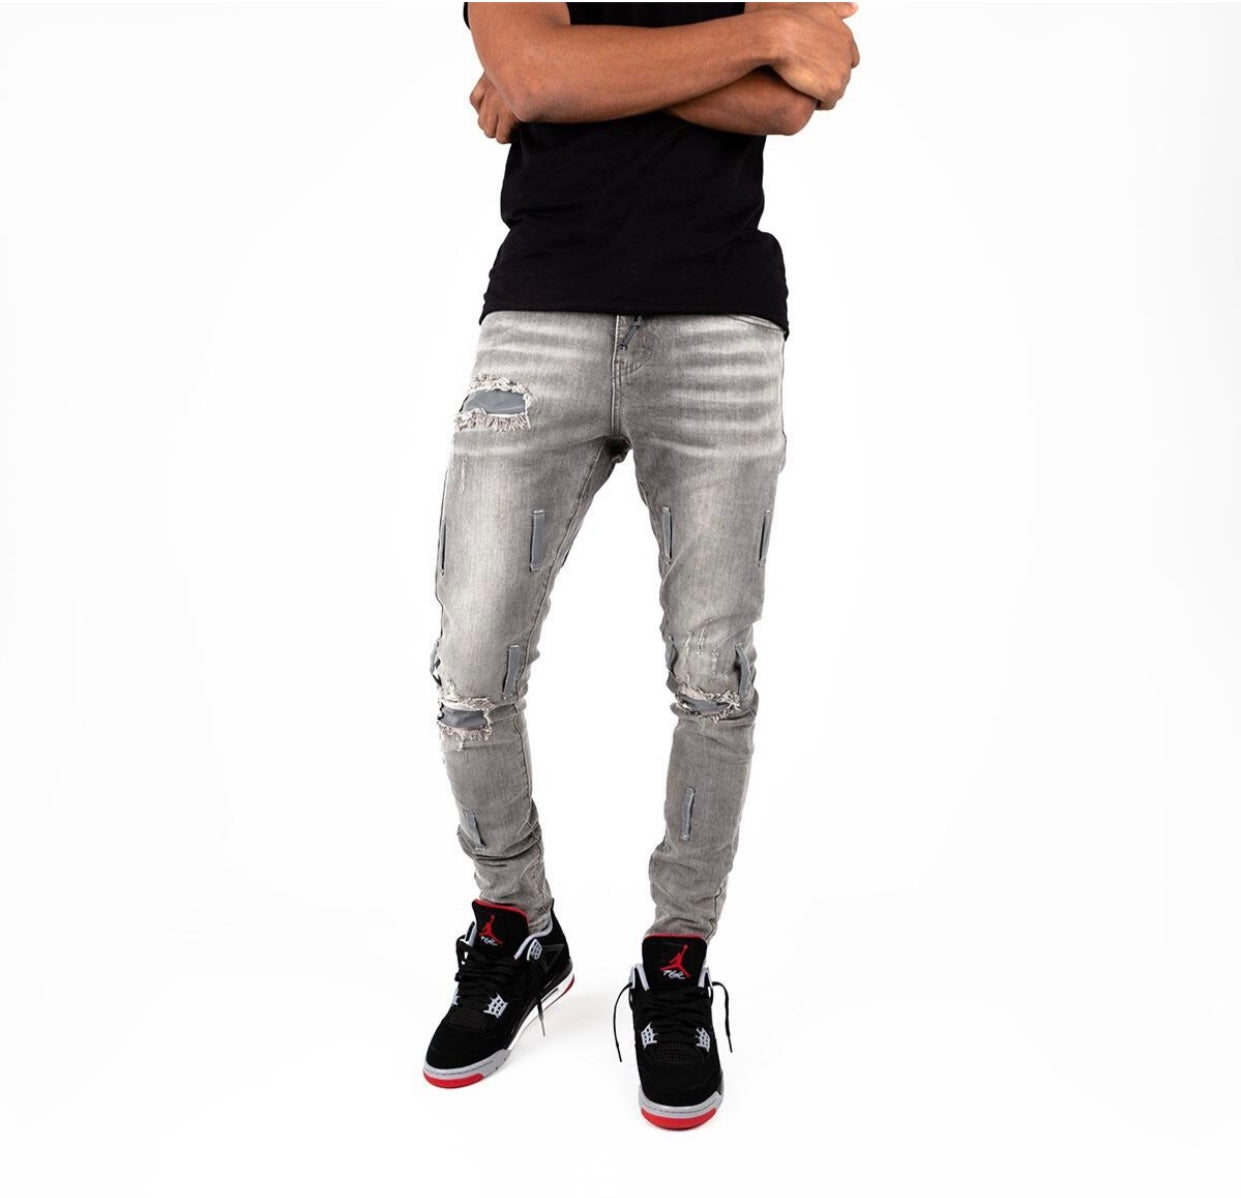 Buy Verbiage Denim Jean Men's Jeans & Pants from SWITCH. Find SWITCH  fashion & more at DrJays.com